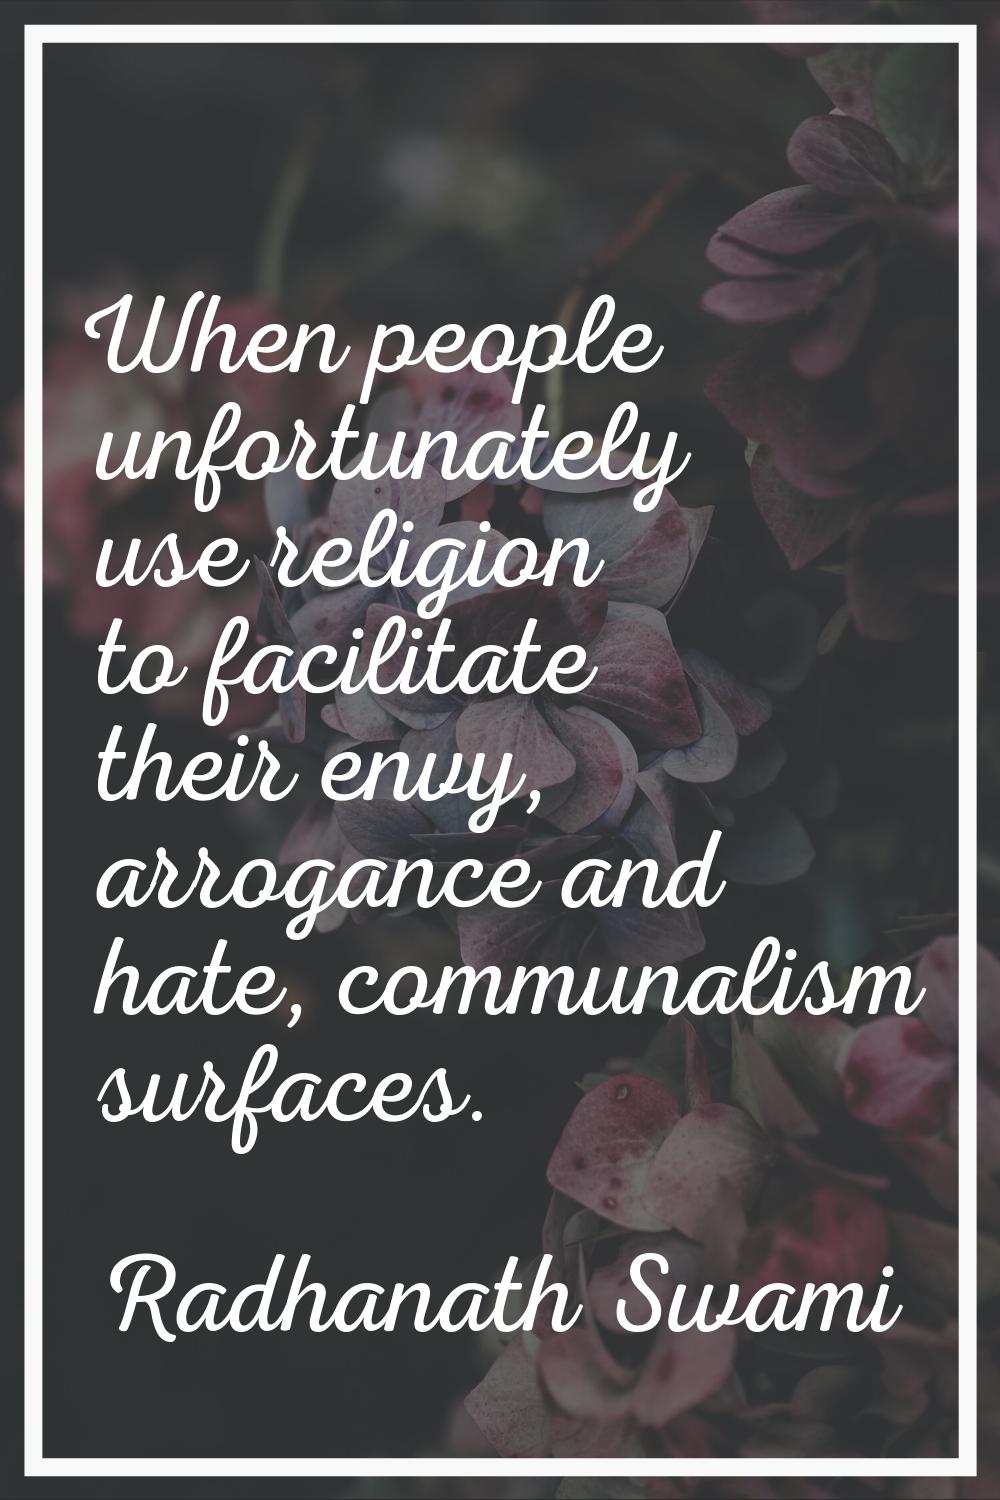 When people unfortunately use religion to facilitate their envy, arrogance and hate, communalism su